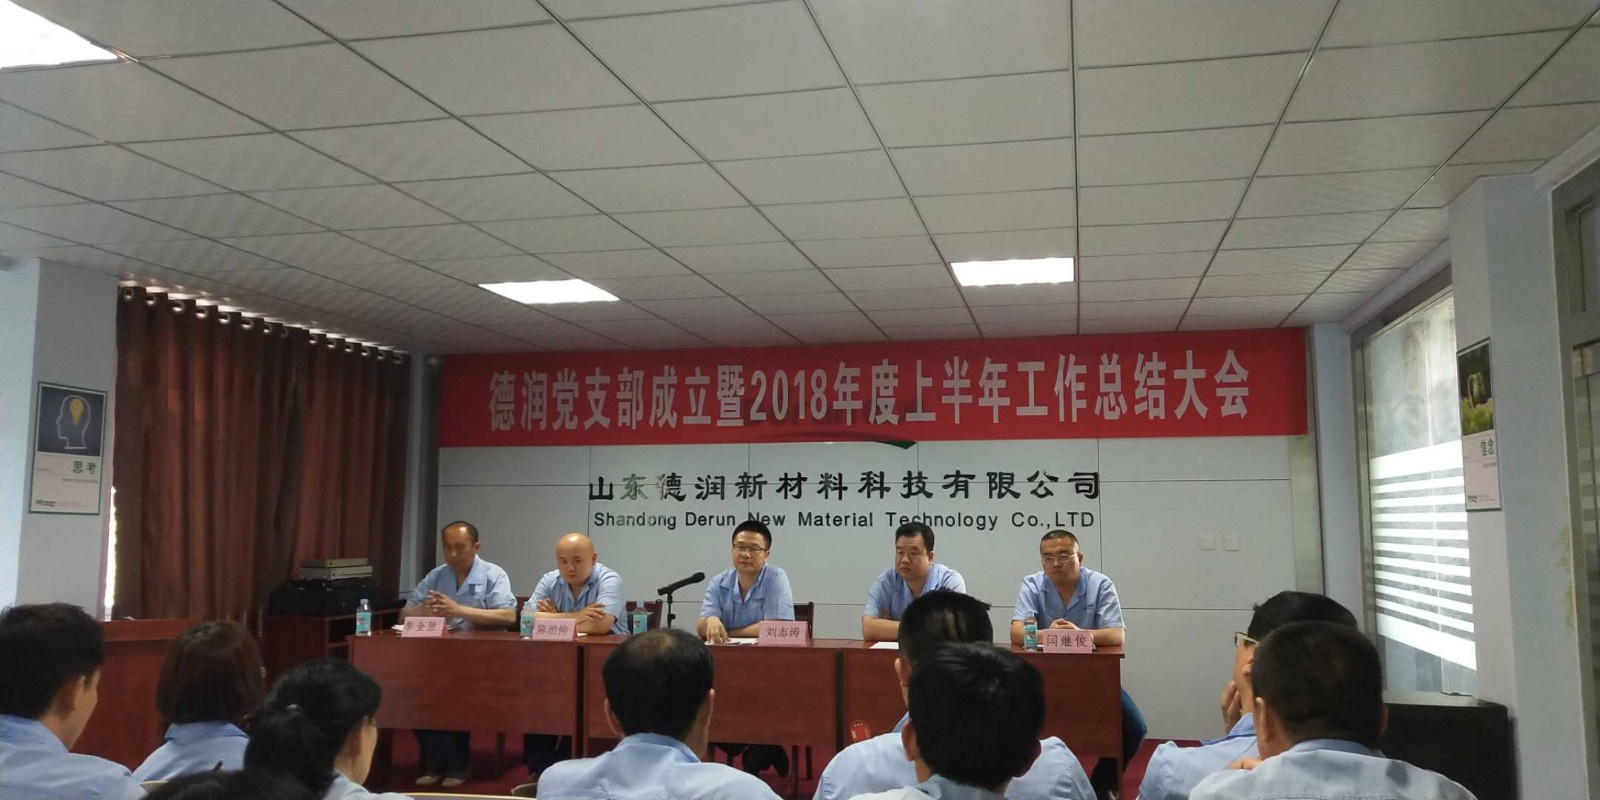 The company held the establishment of the party branch and the work summary meeting for the first half of 2018